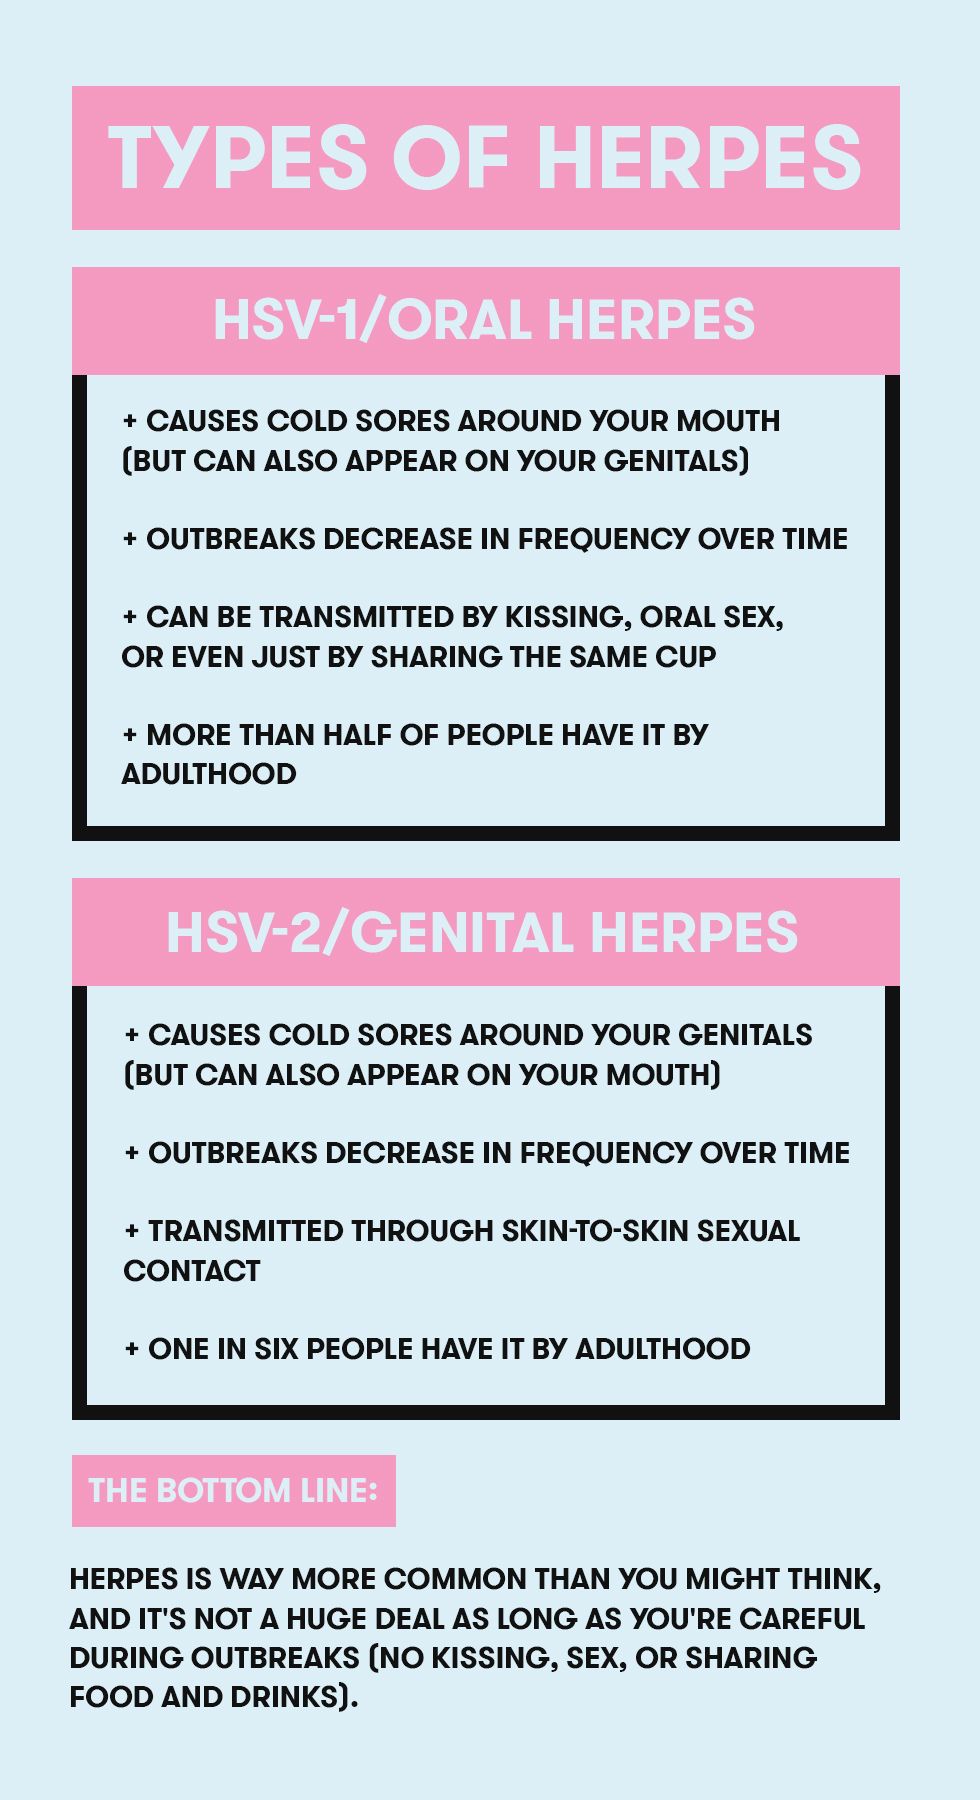 Are Cold Sores a Sign of Herpes? photo image